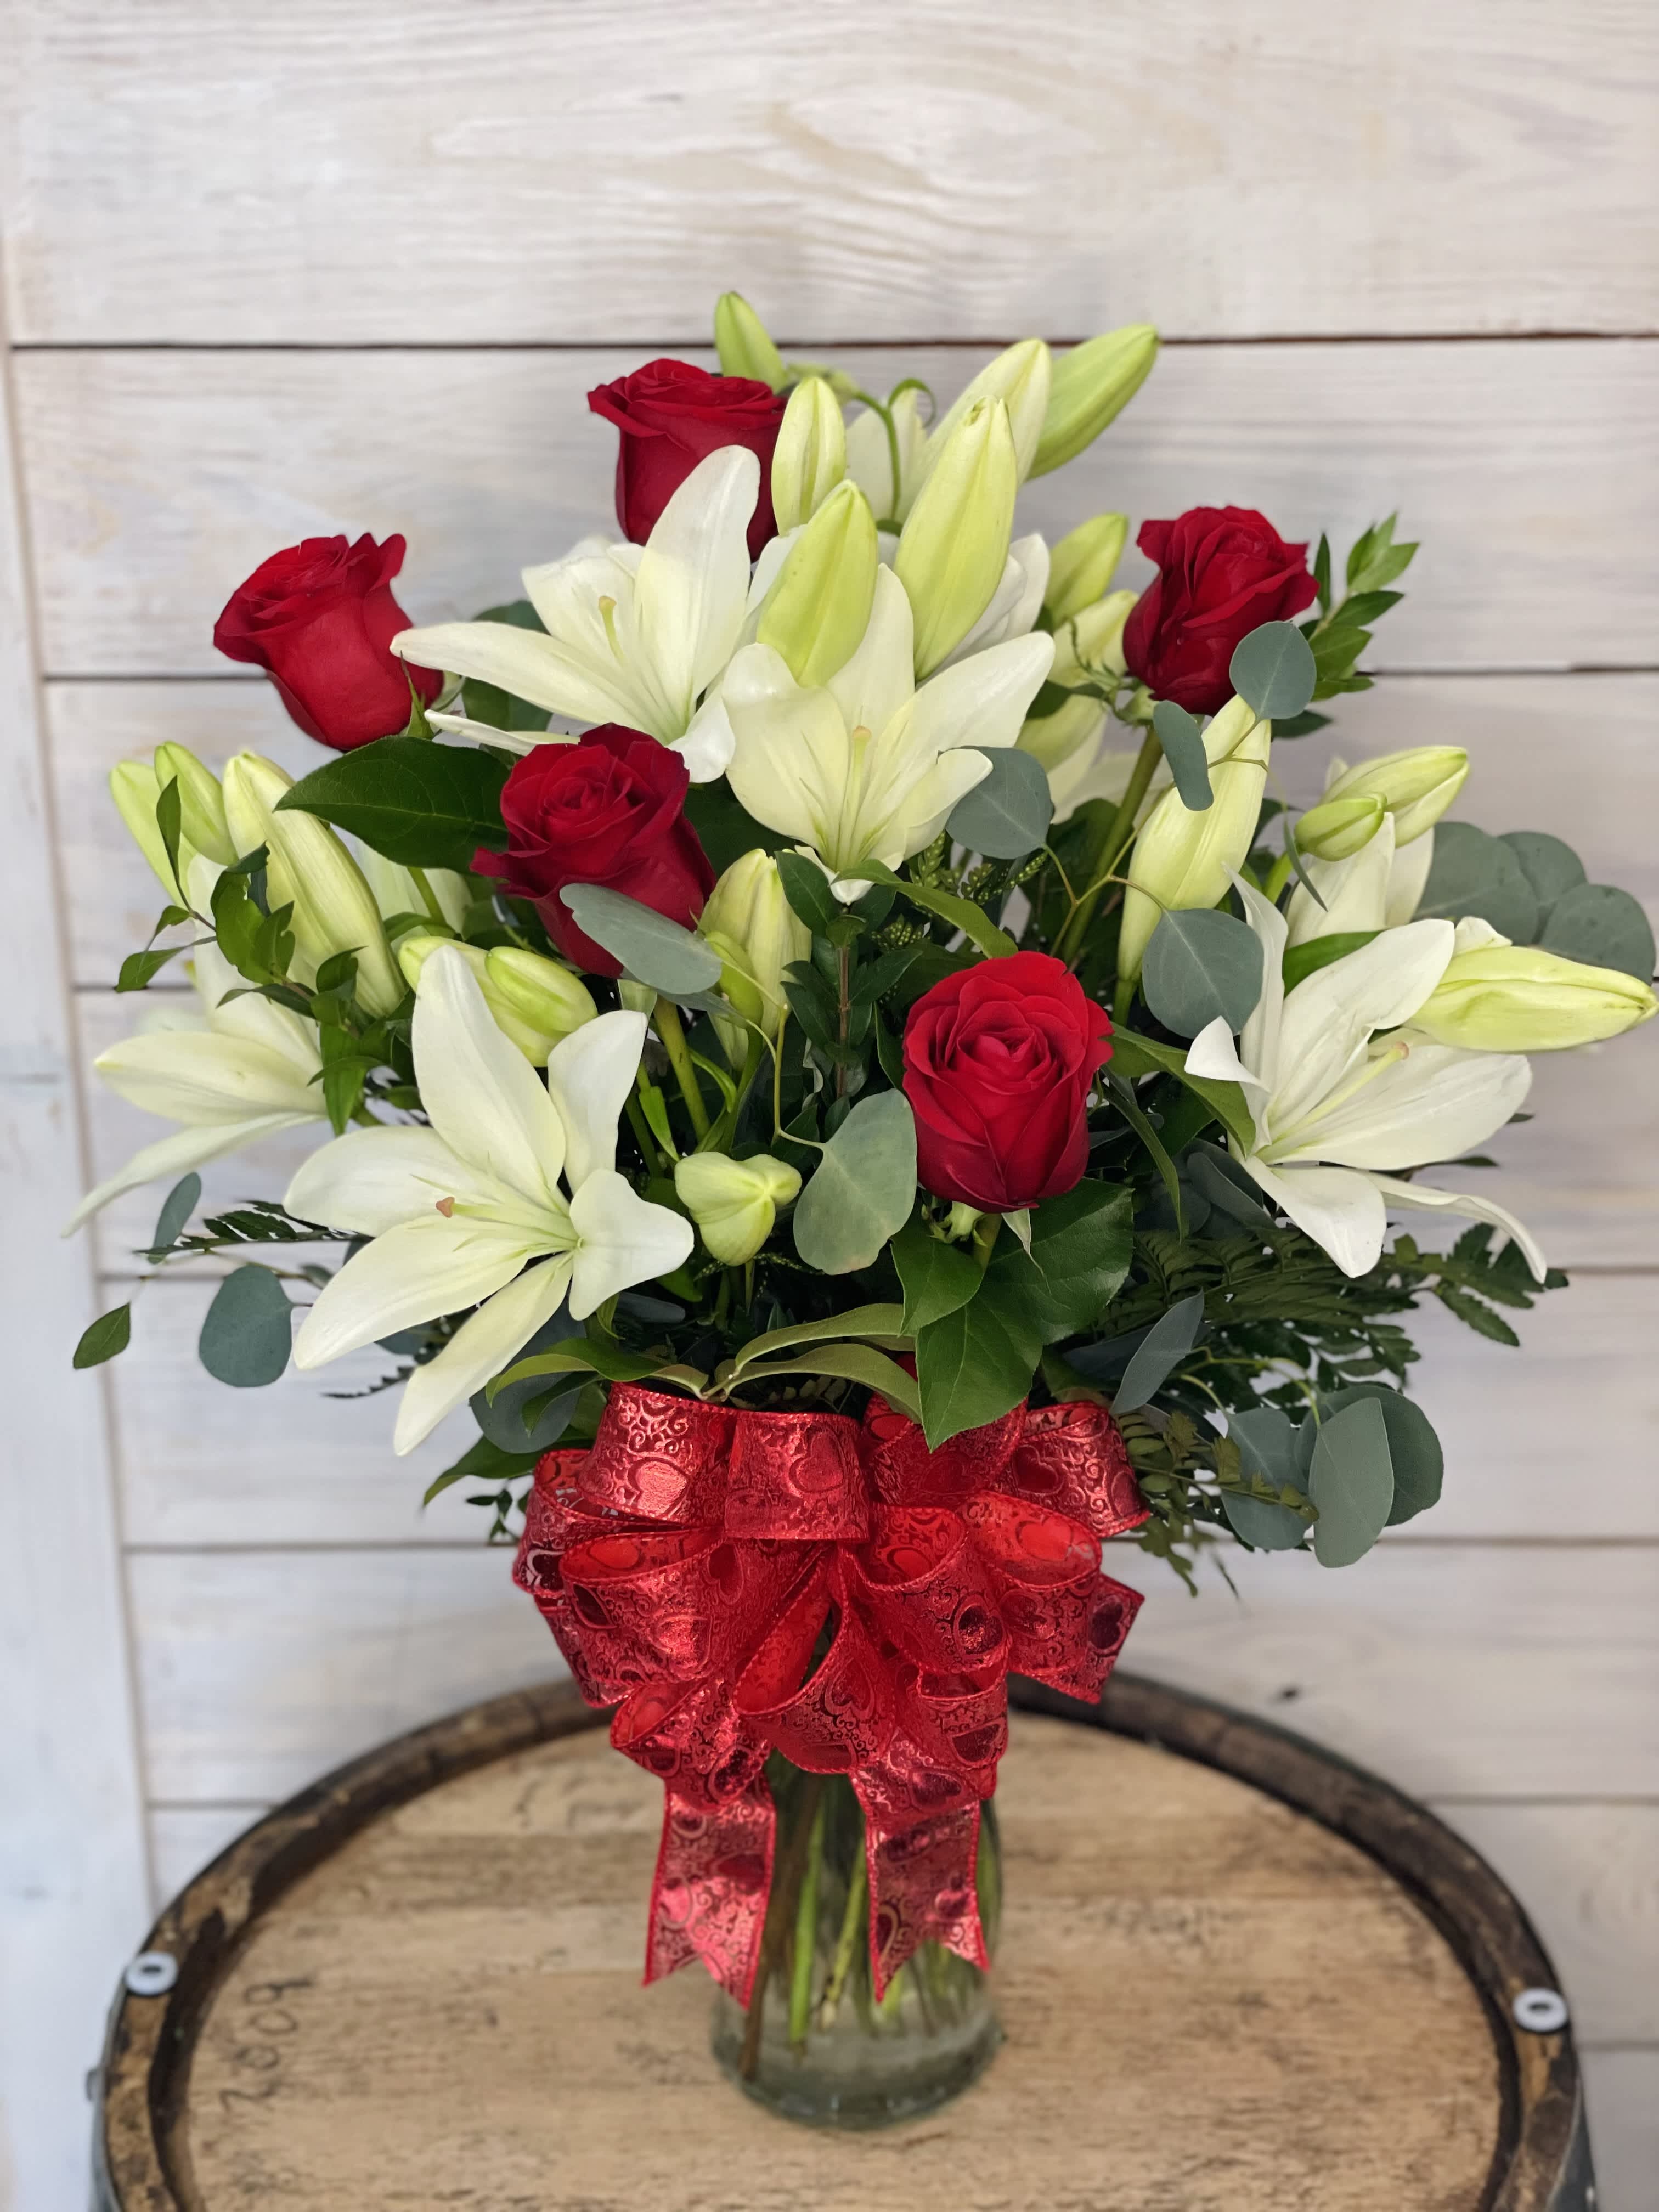 Lilies and Roses - Outstanding and stunning! 6 lilies and 6 roses in a vase with a mix of nice greenery.